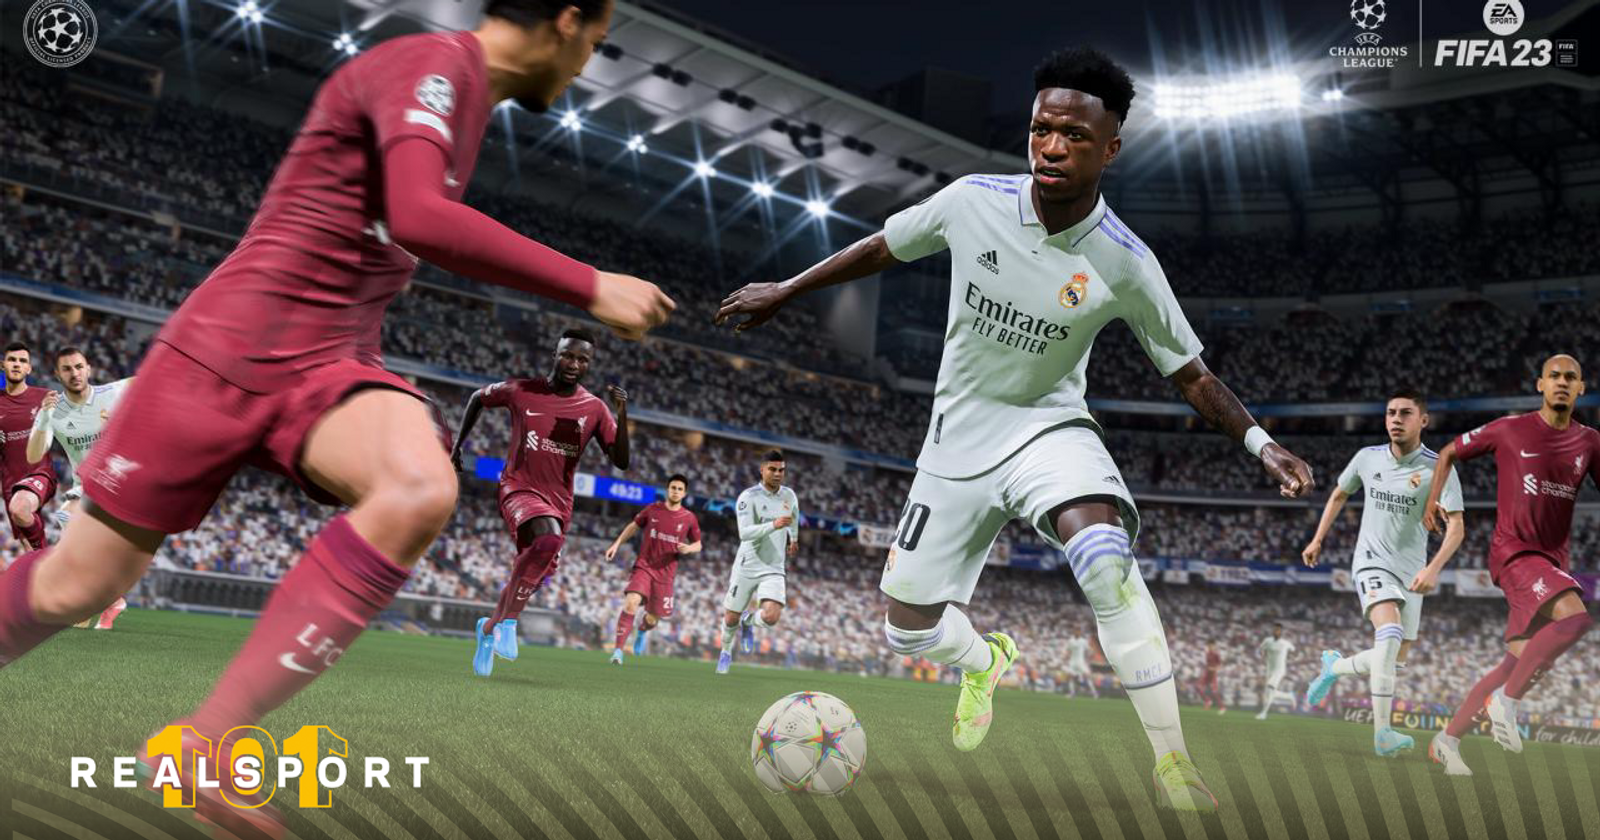 FIFA 23 To Have Cross-Play For Consoles And PC - Get2Gaming